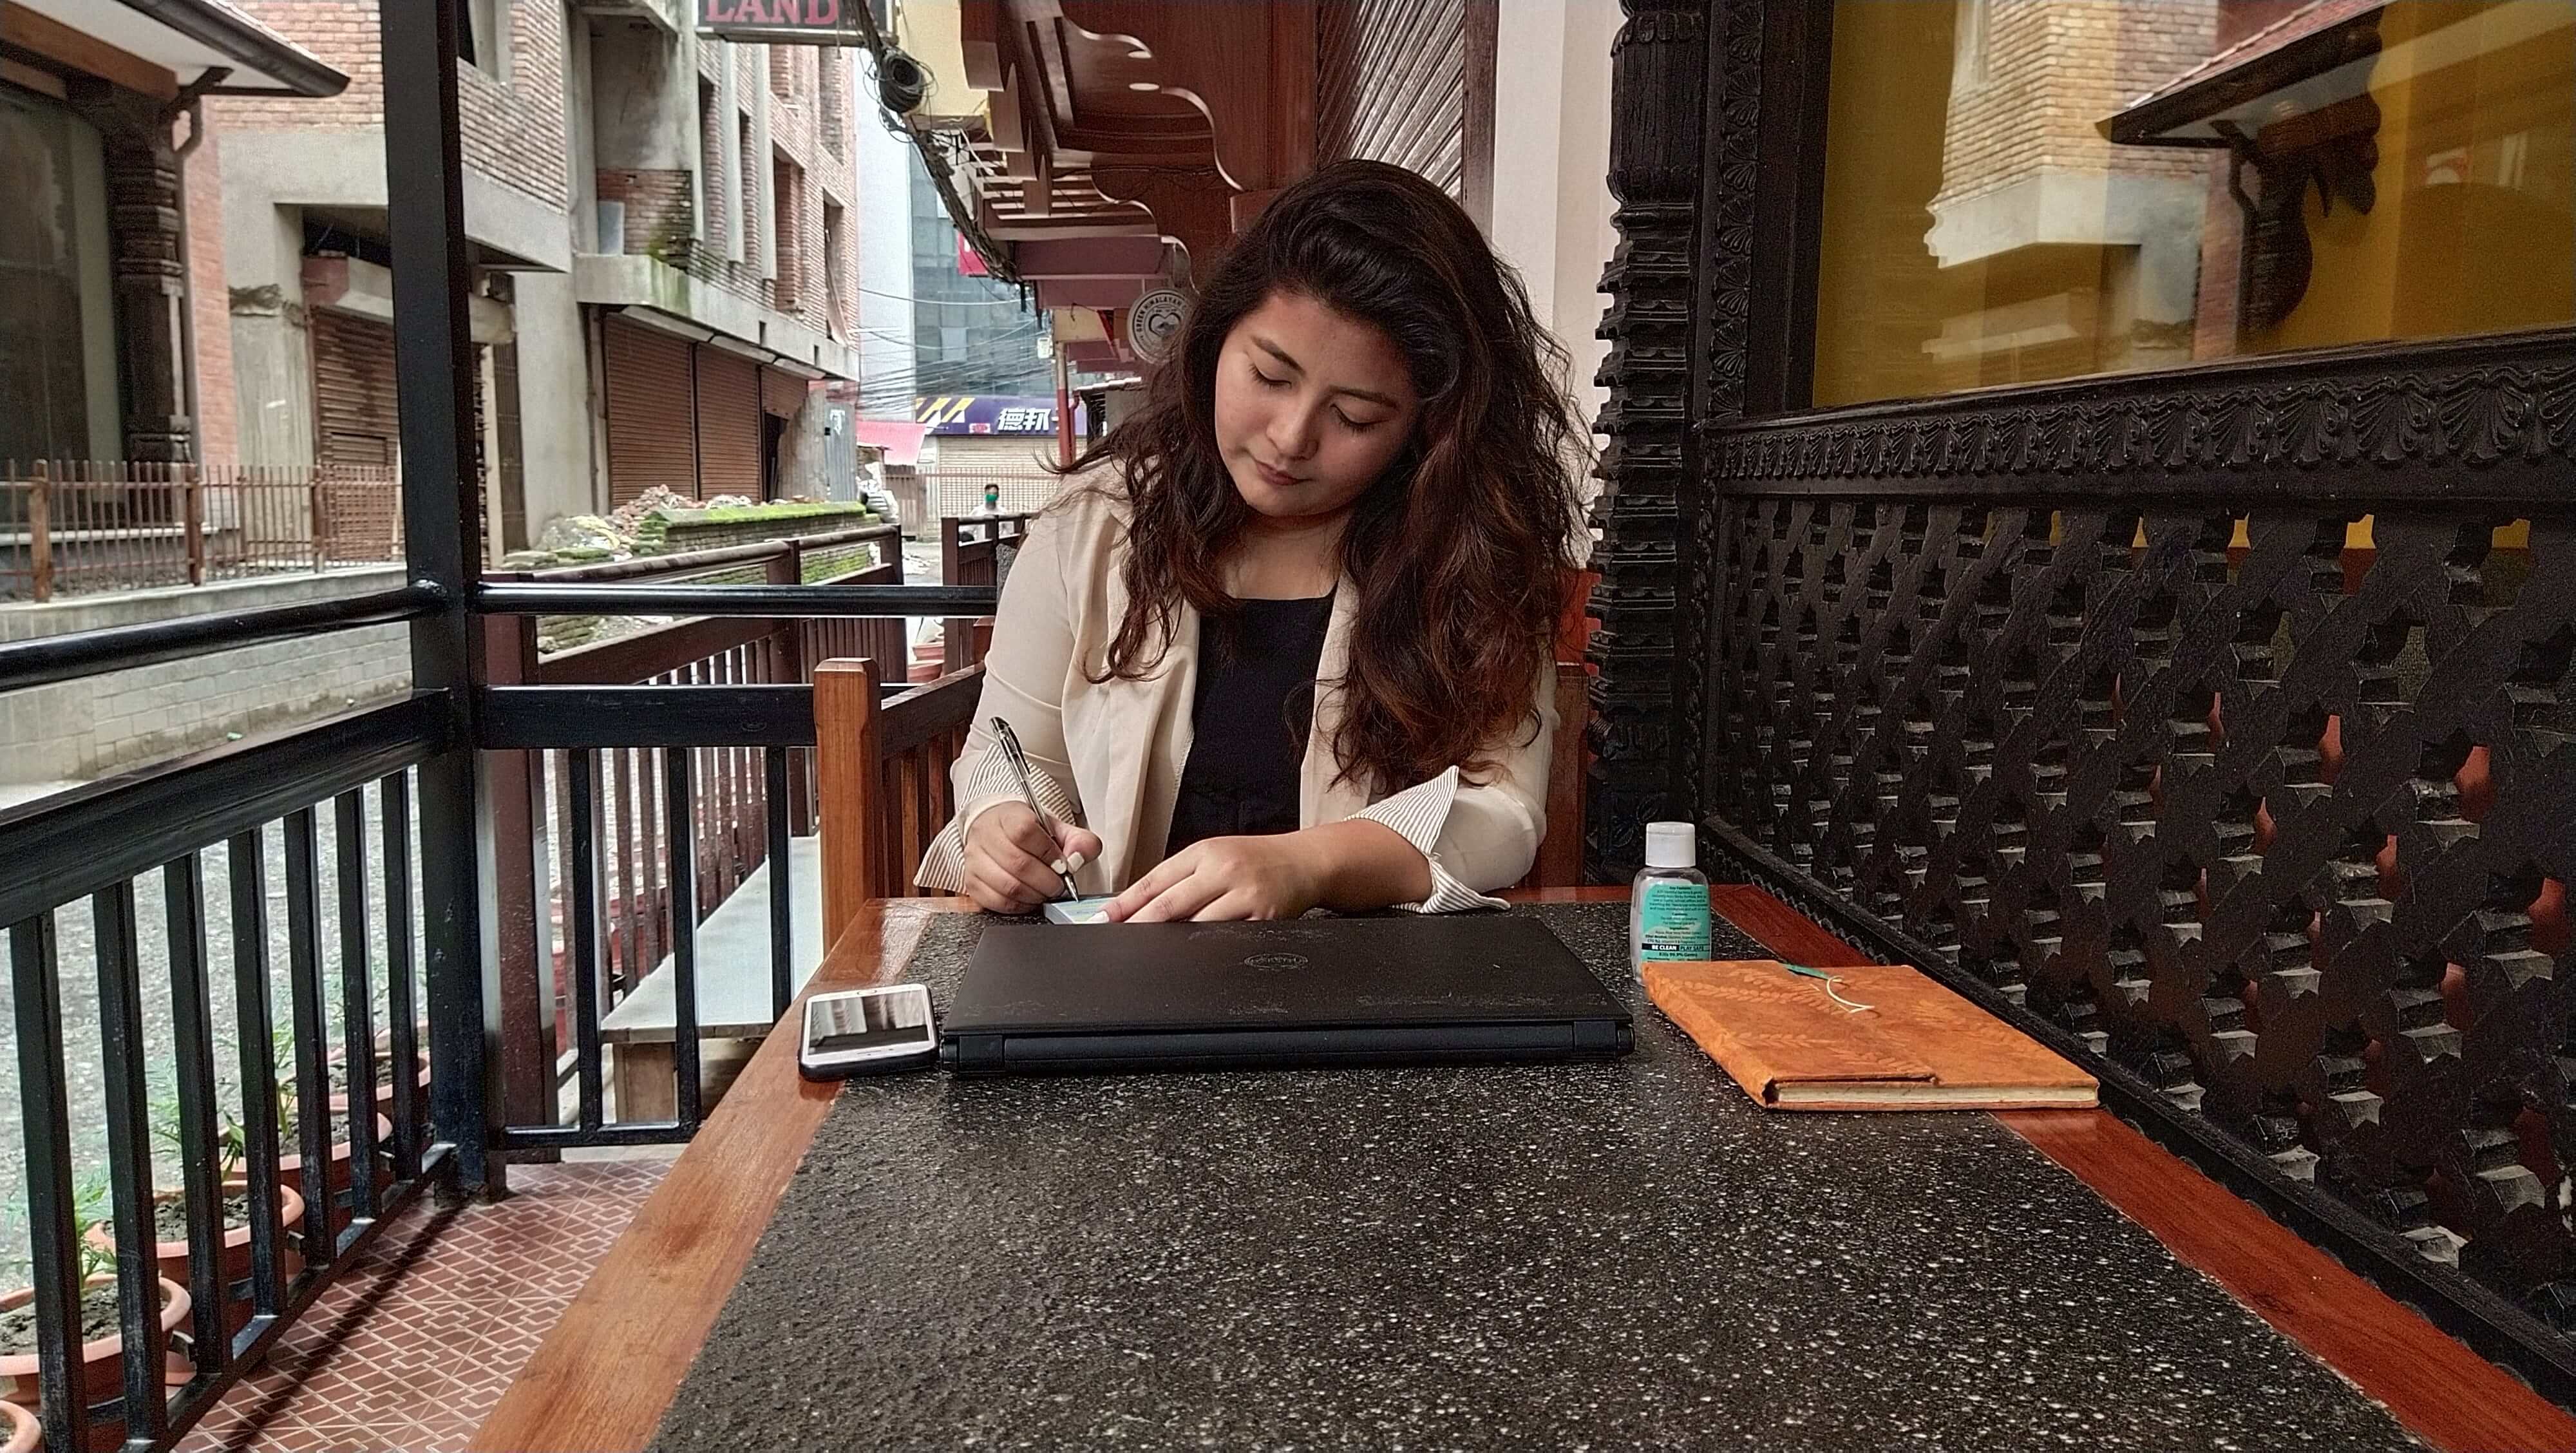 A female student taking some notes along with her laptop and mobile device.